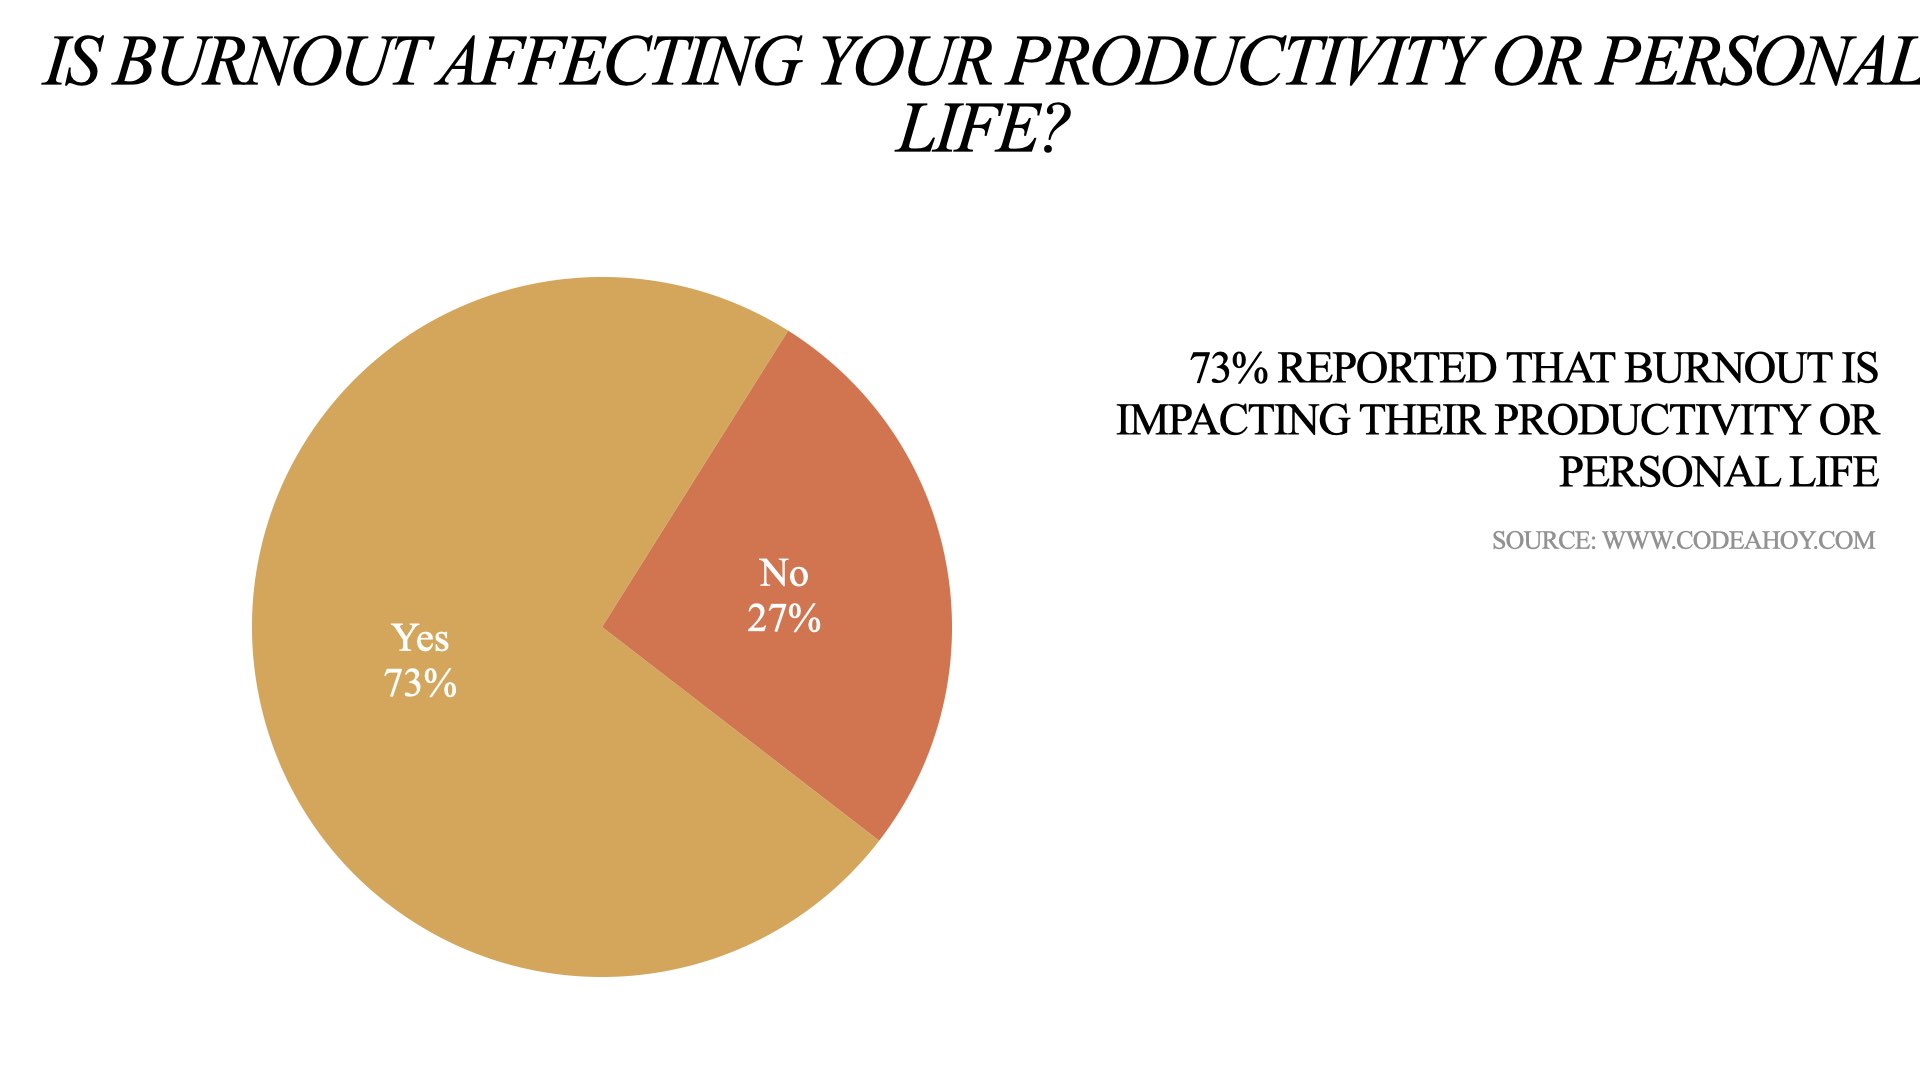 Software developers burnout survey chart and stats - 2